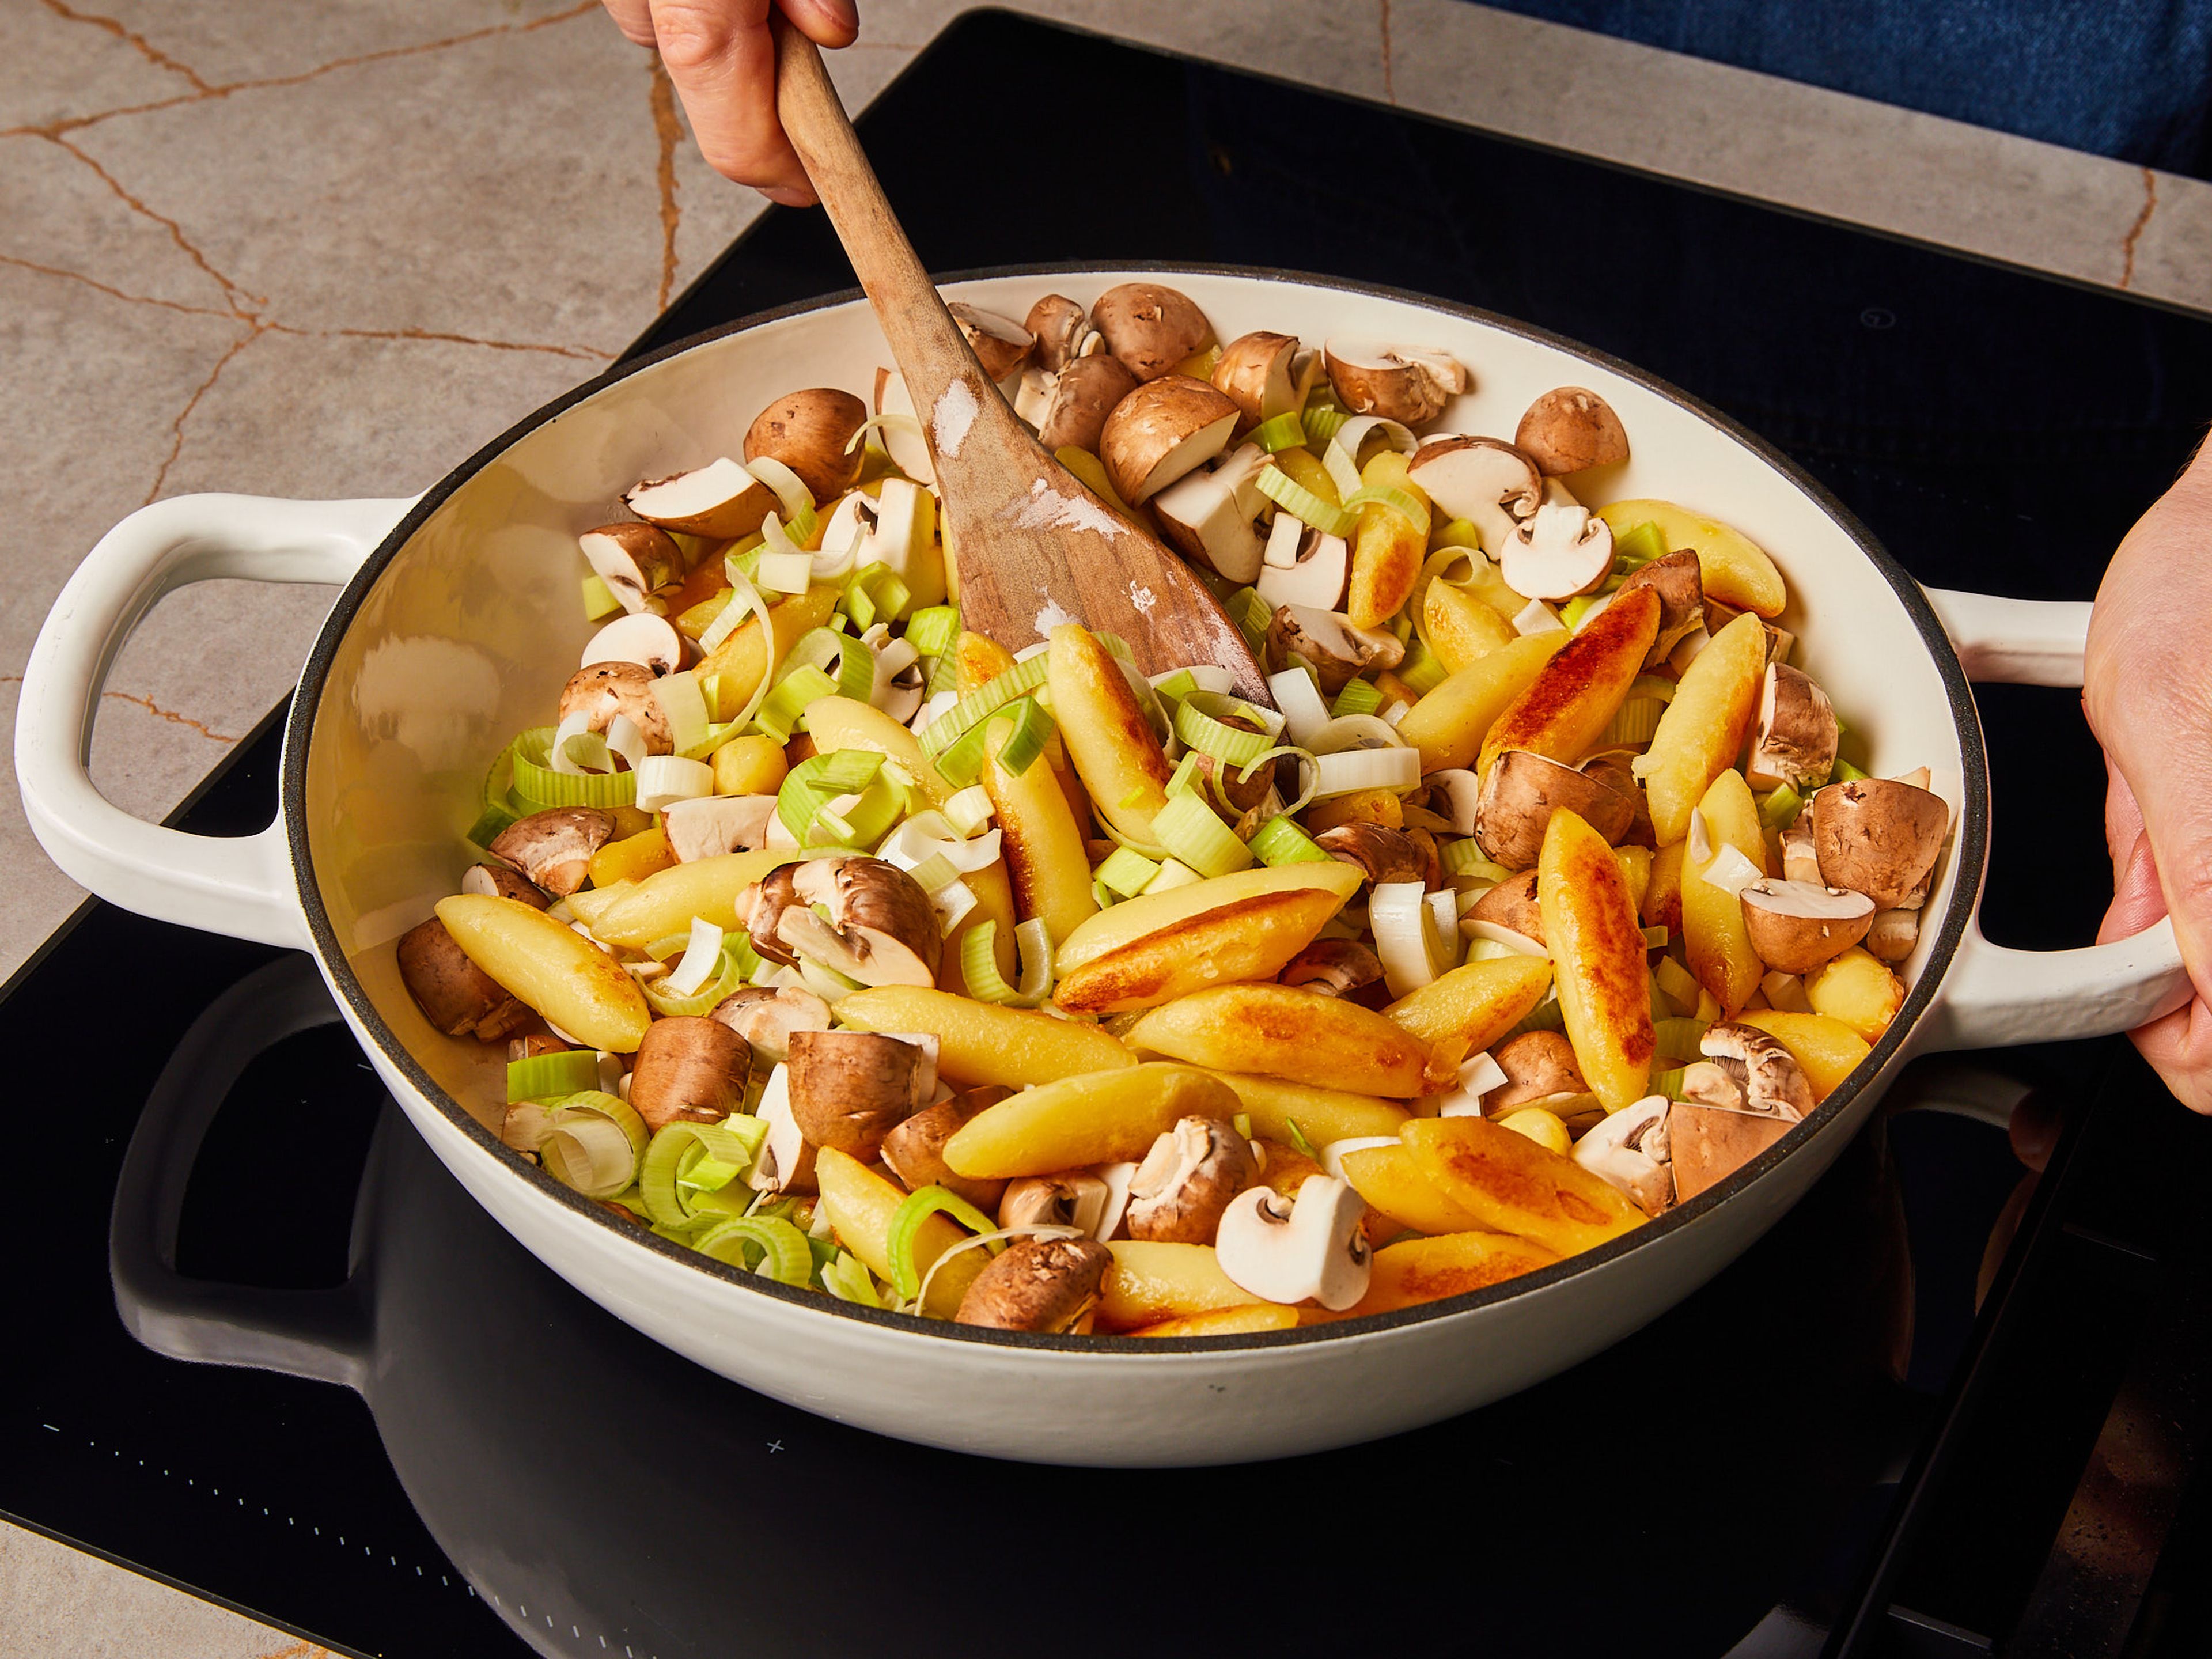 Heat oil in an ovenproof frying pan. Sauté the German gnocchi for approx. 3–4 min. until golden brown, then add garlic, leeks, and mushrooms. Reduce heat slightly and sauté everything together for approx. 4–6 min. until leeks have cooked down a bit.